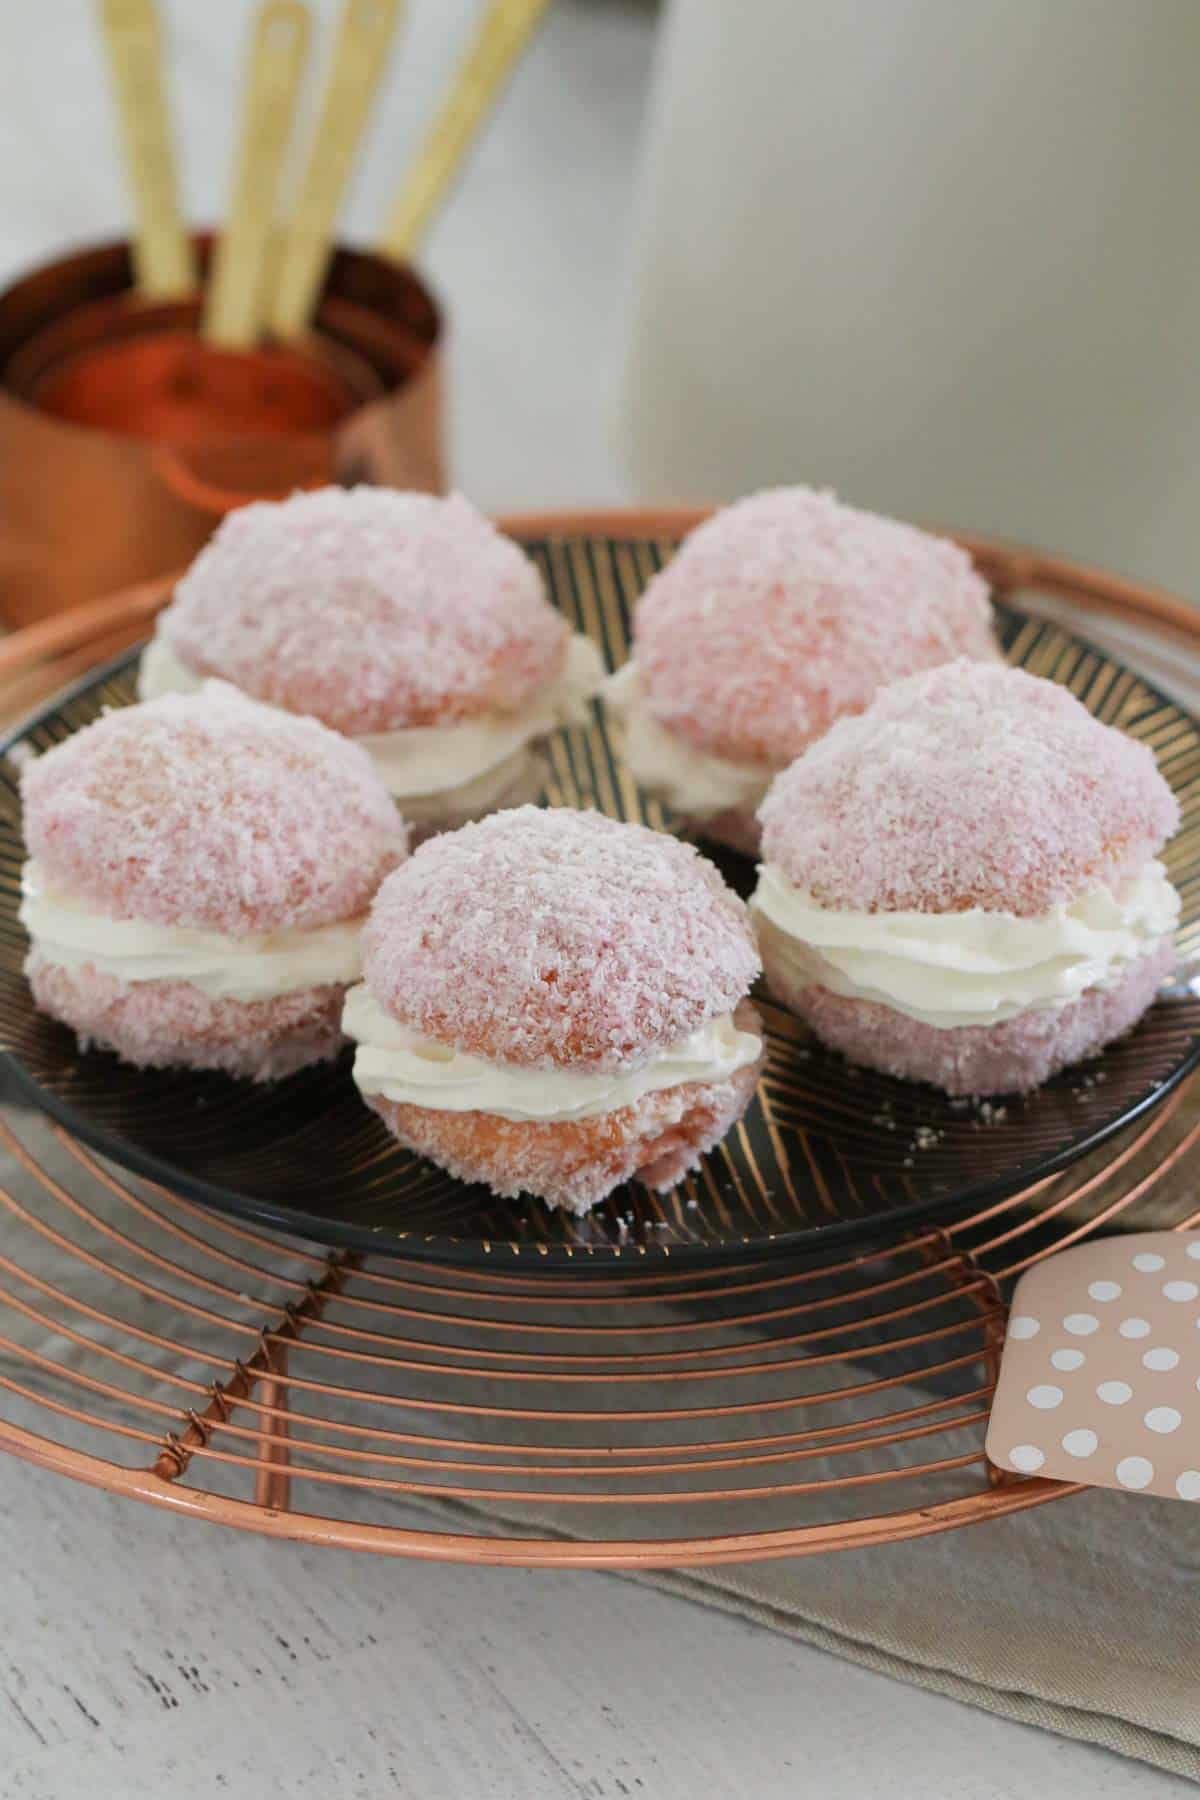 Five jelly cakes filled with whipped cream and served on a black plate.